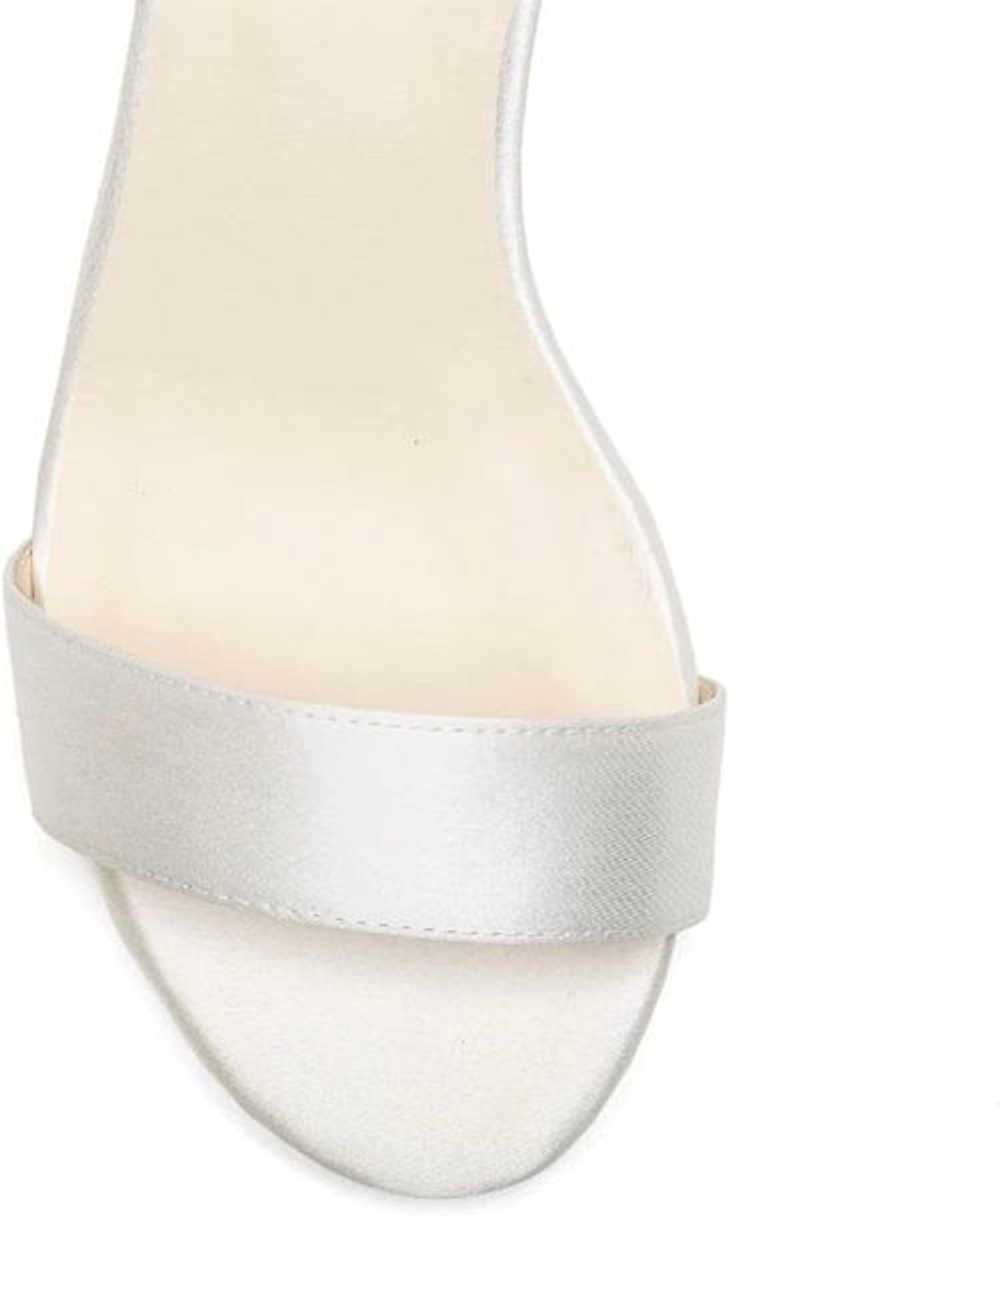 Tall Size Size 14 Satin Tie Shoe - image 3